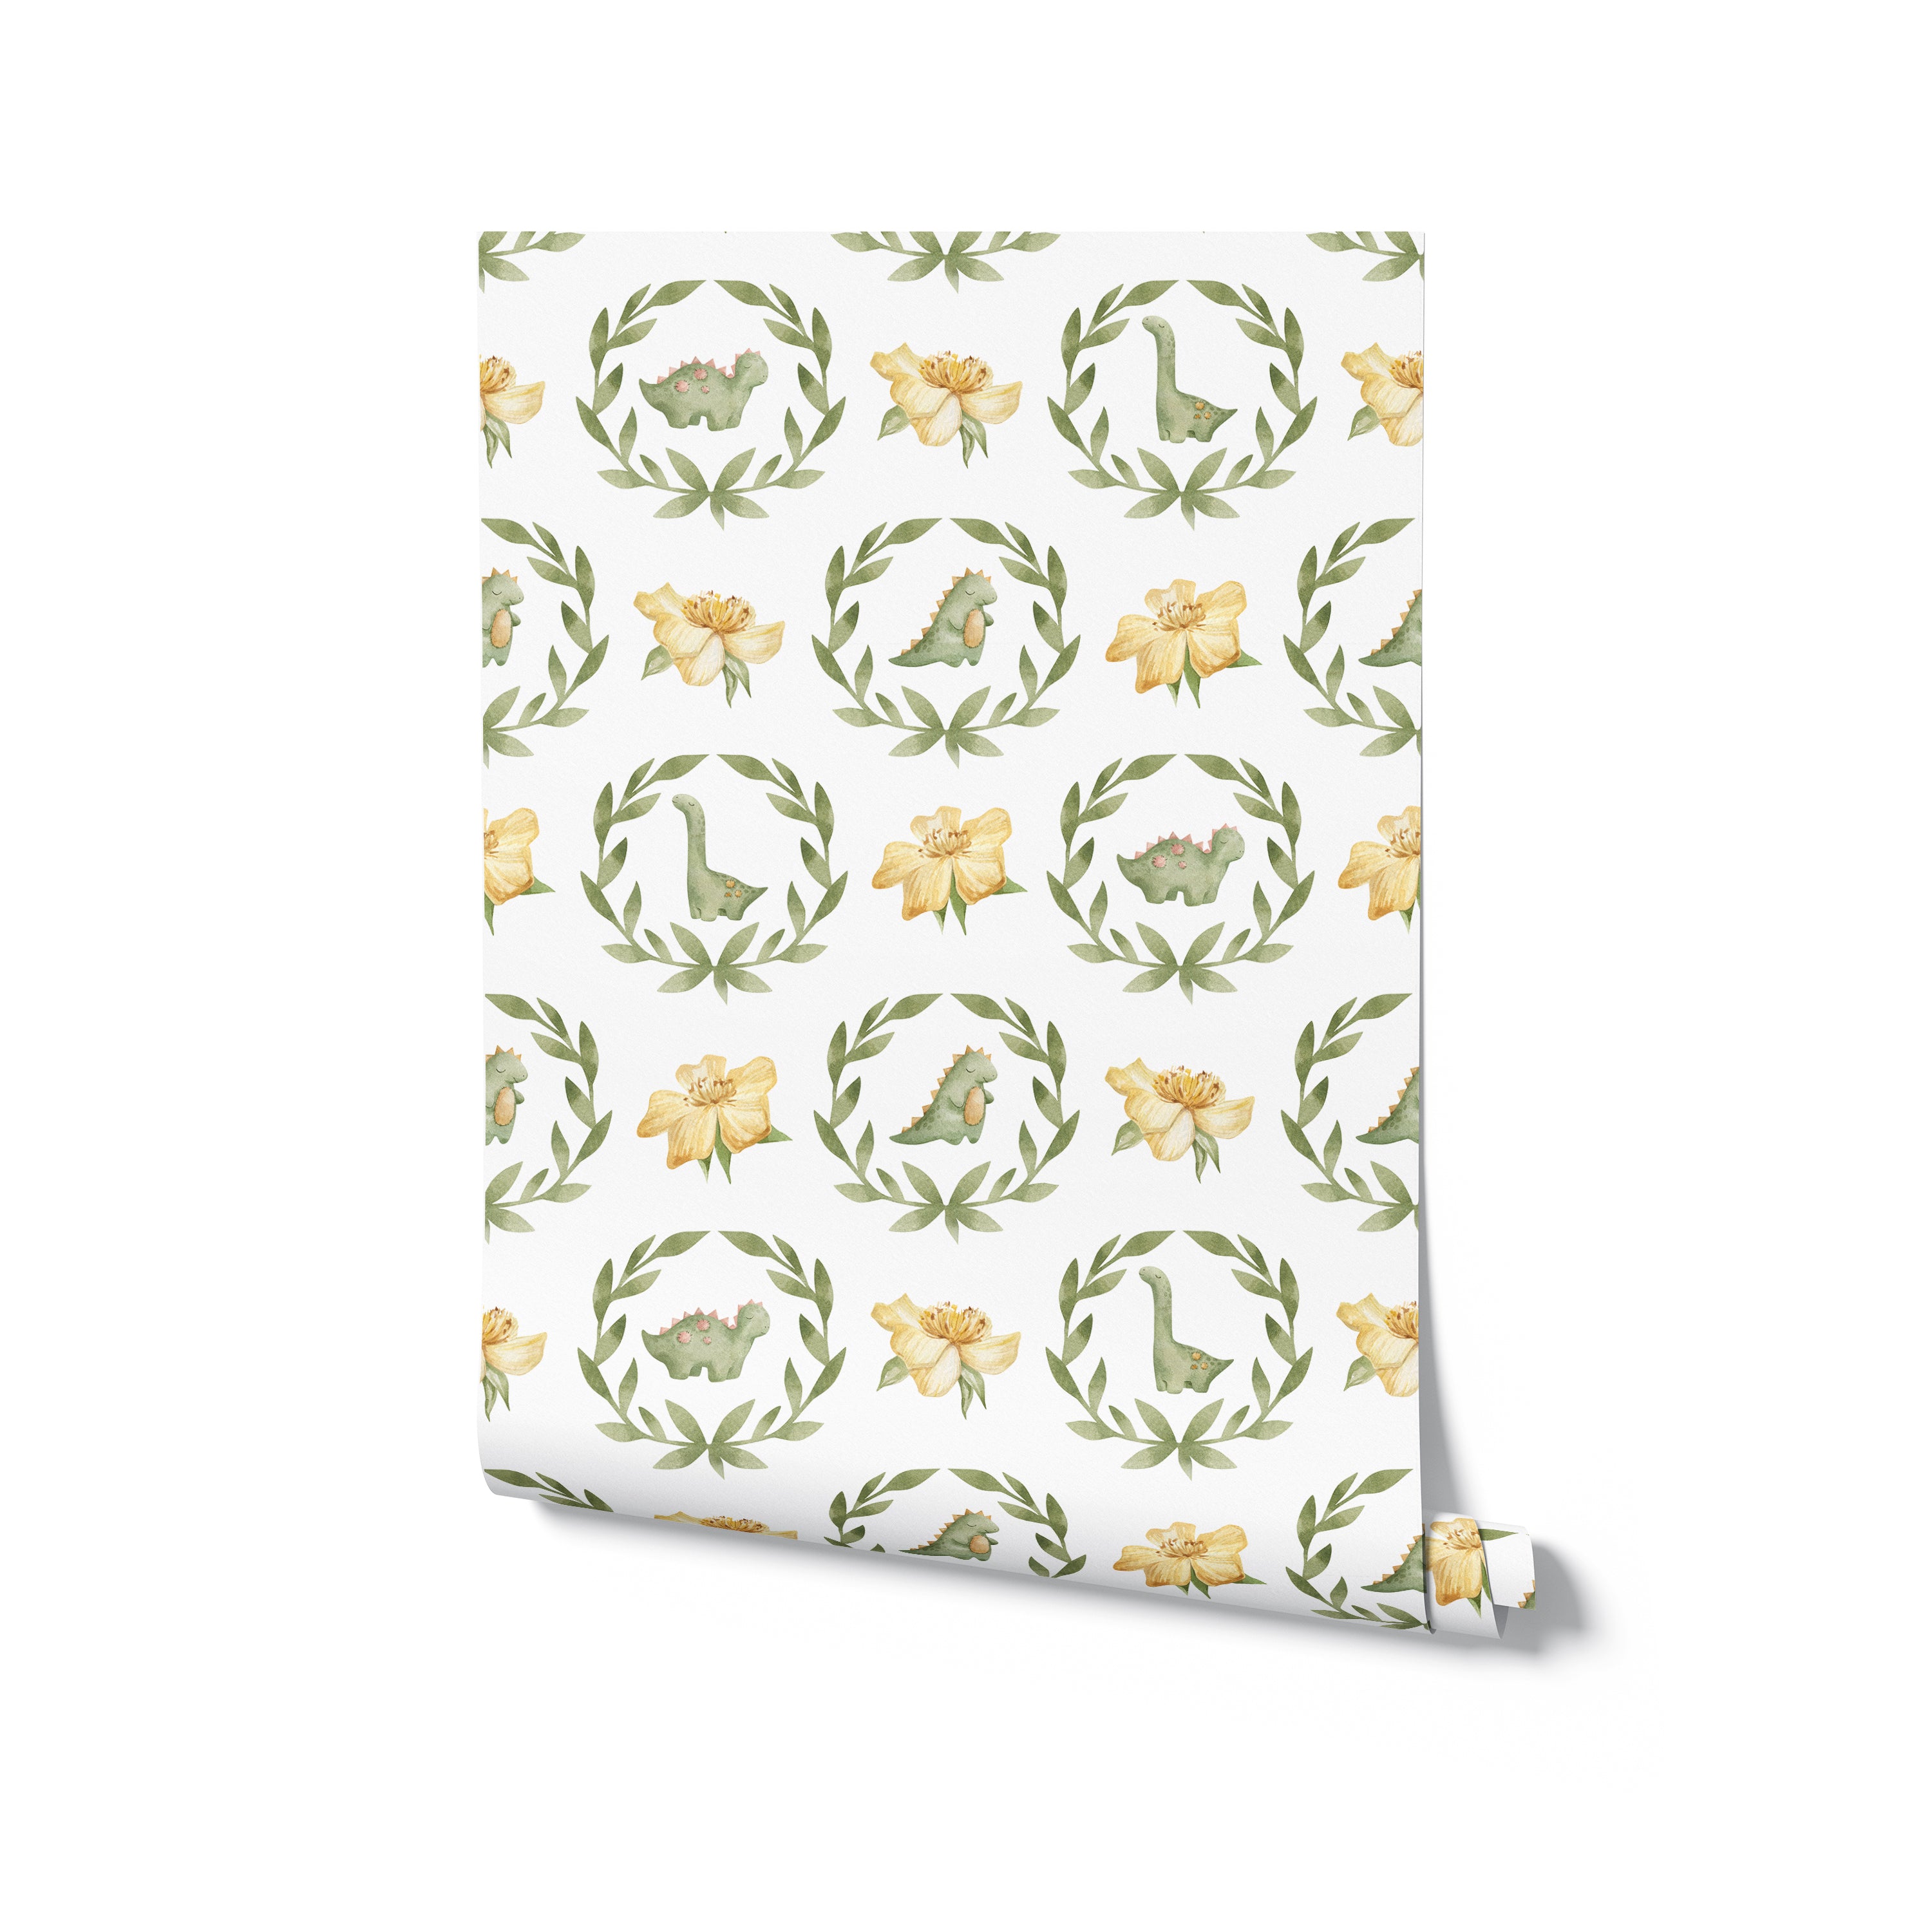 Rolled nursery wallpaper with watercolor baby dinosaurs and floral wreaths design.